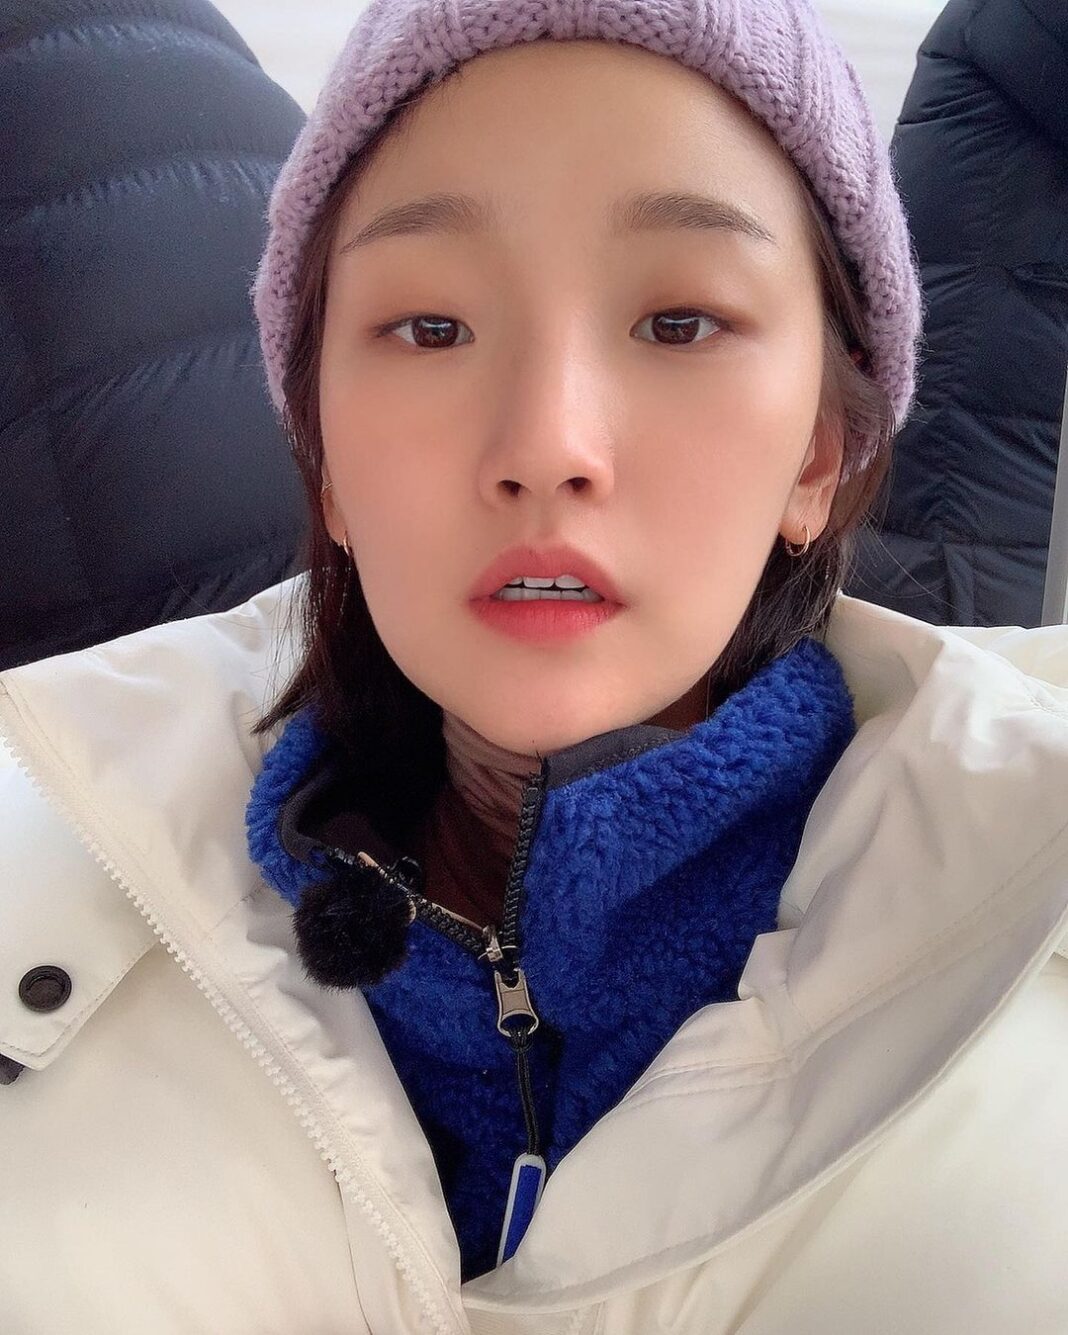 After a Papillary Thyroid Cancer Diagnosis, Park So-Dam Undergoes Surgery